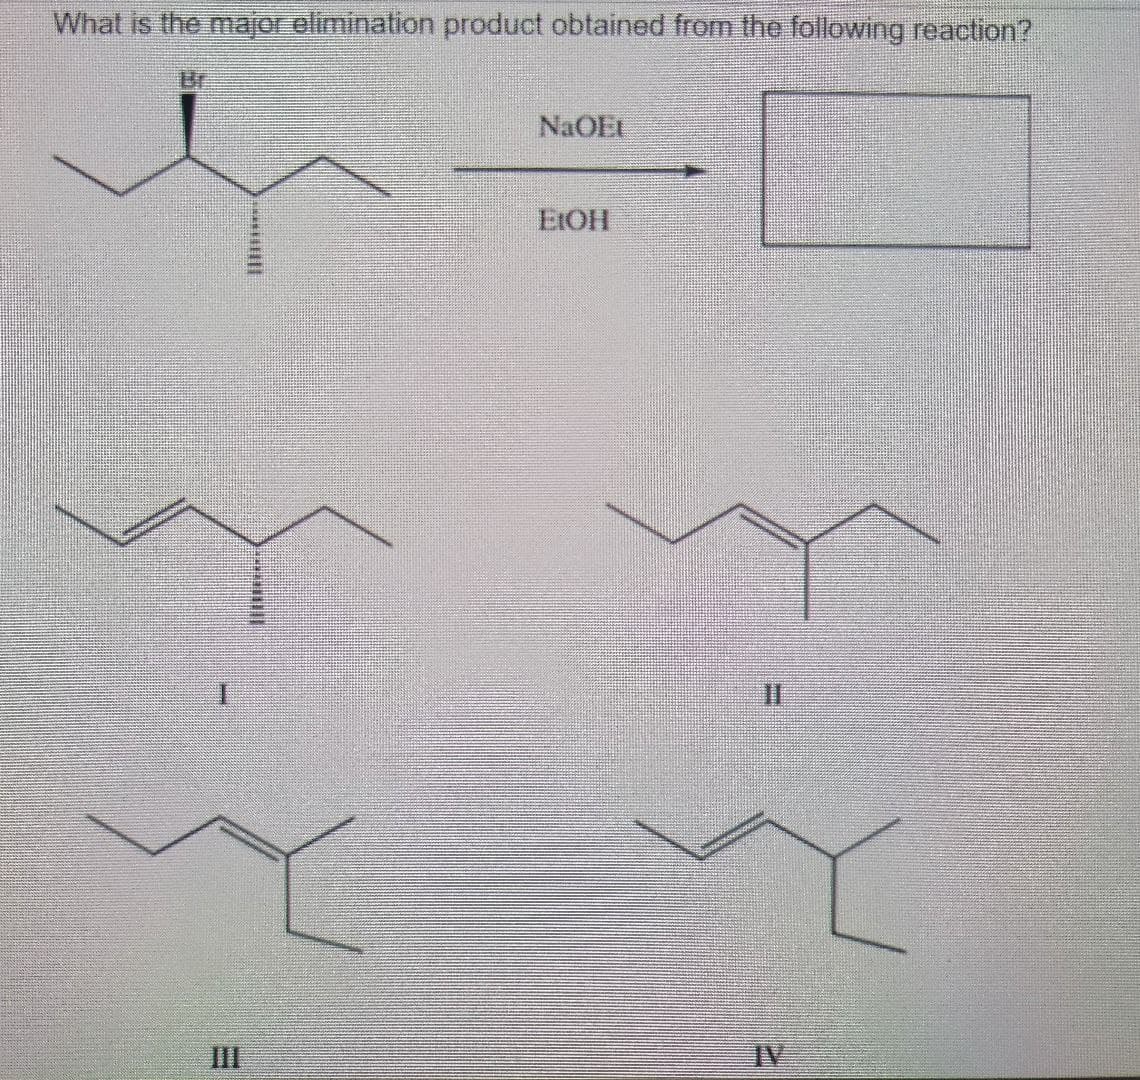 What is the major elimination product obtained from the following reaction?
Br
NaOEL
EtOH